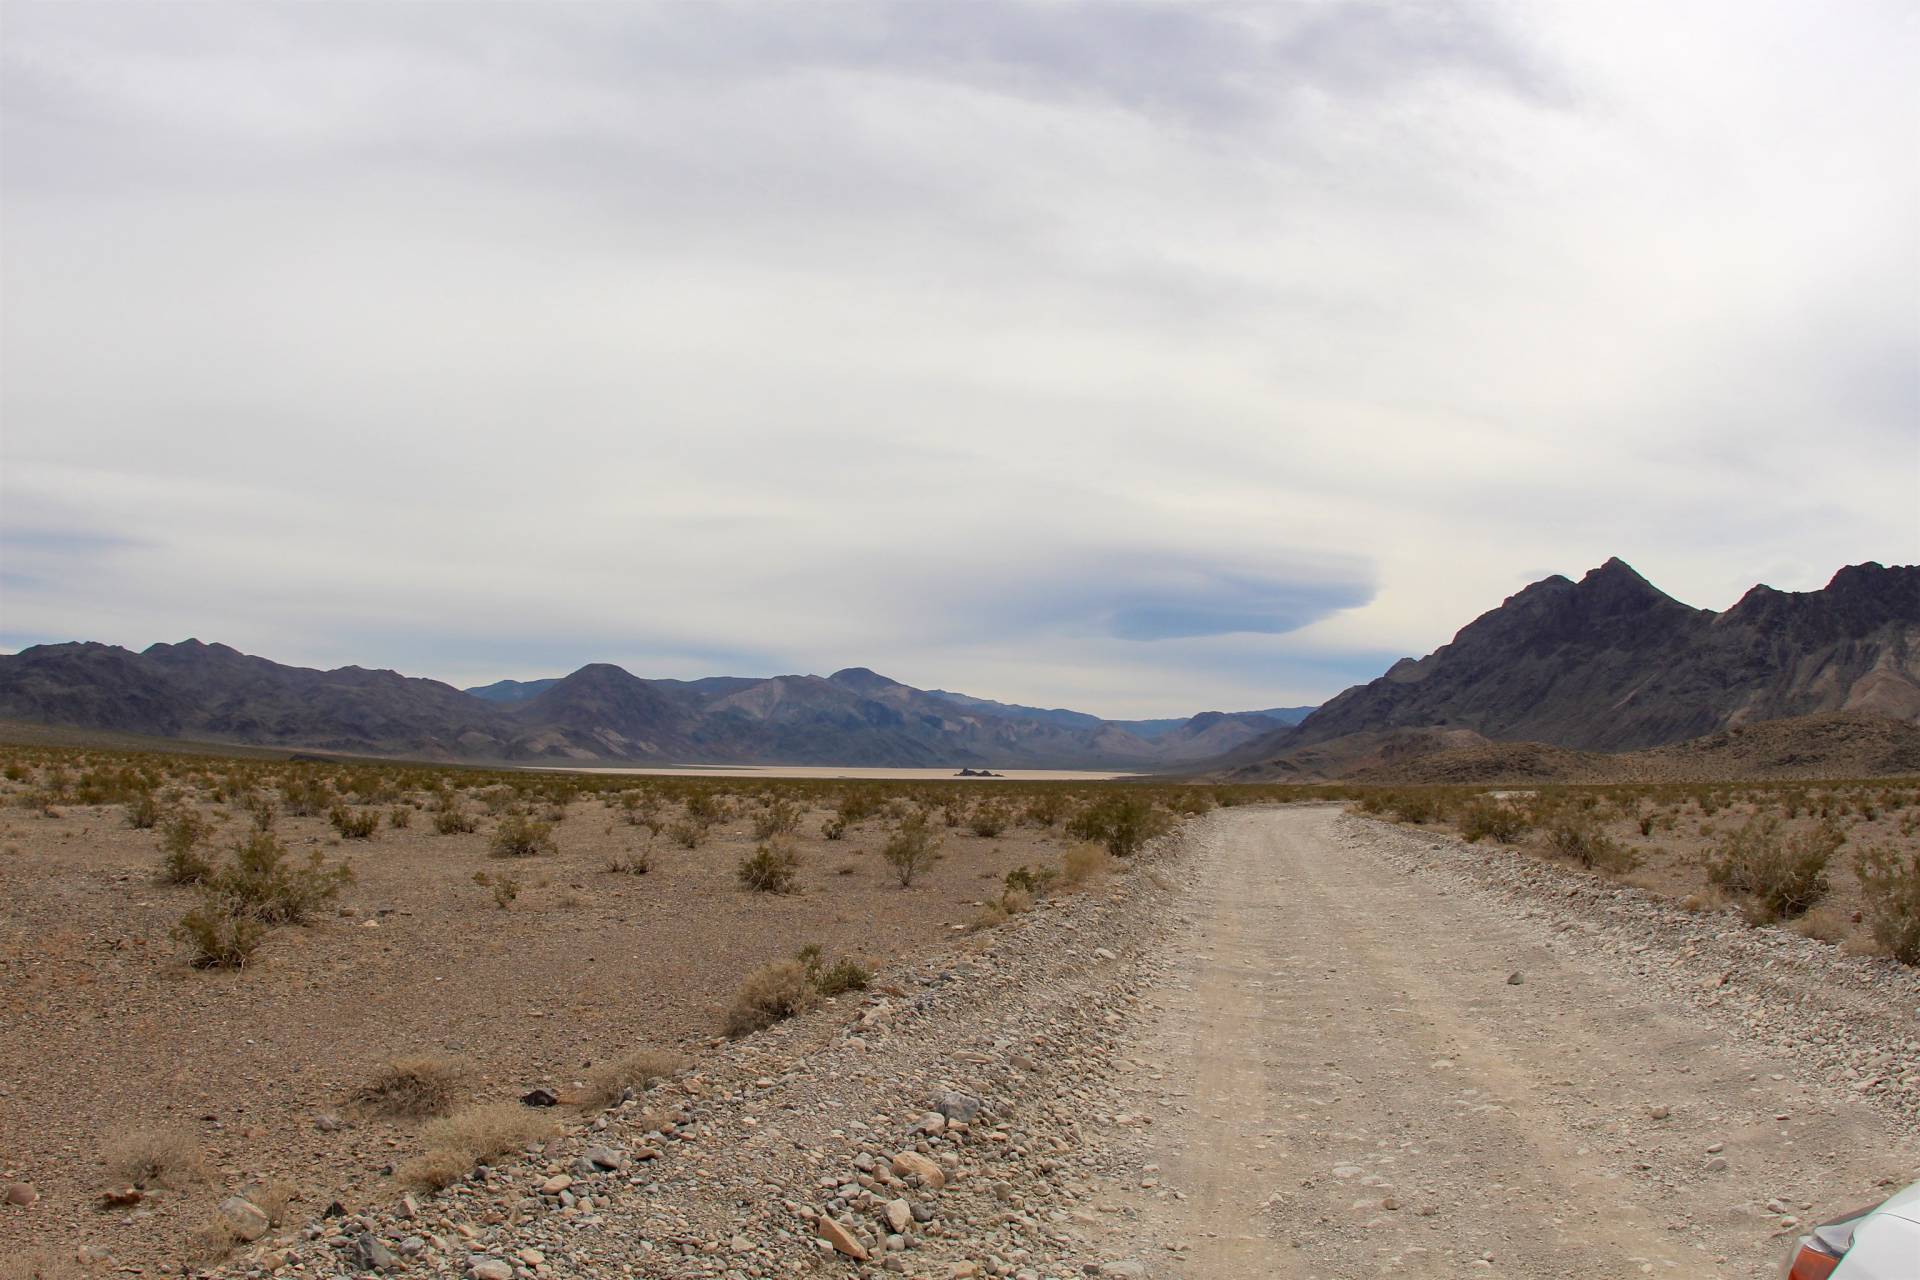 Racetrack Road near the Grandstand, Death Valley National Park, California